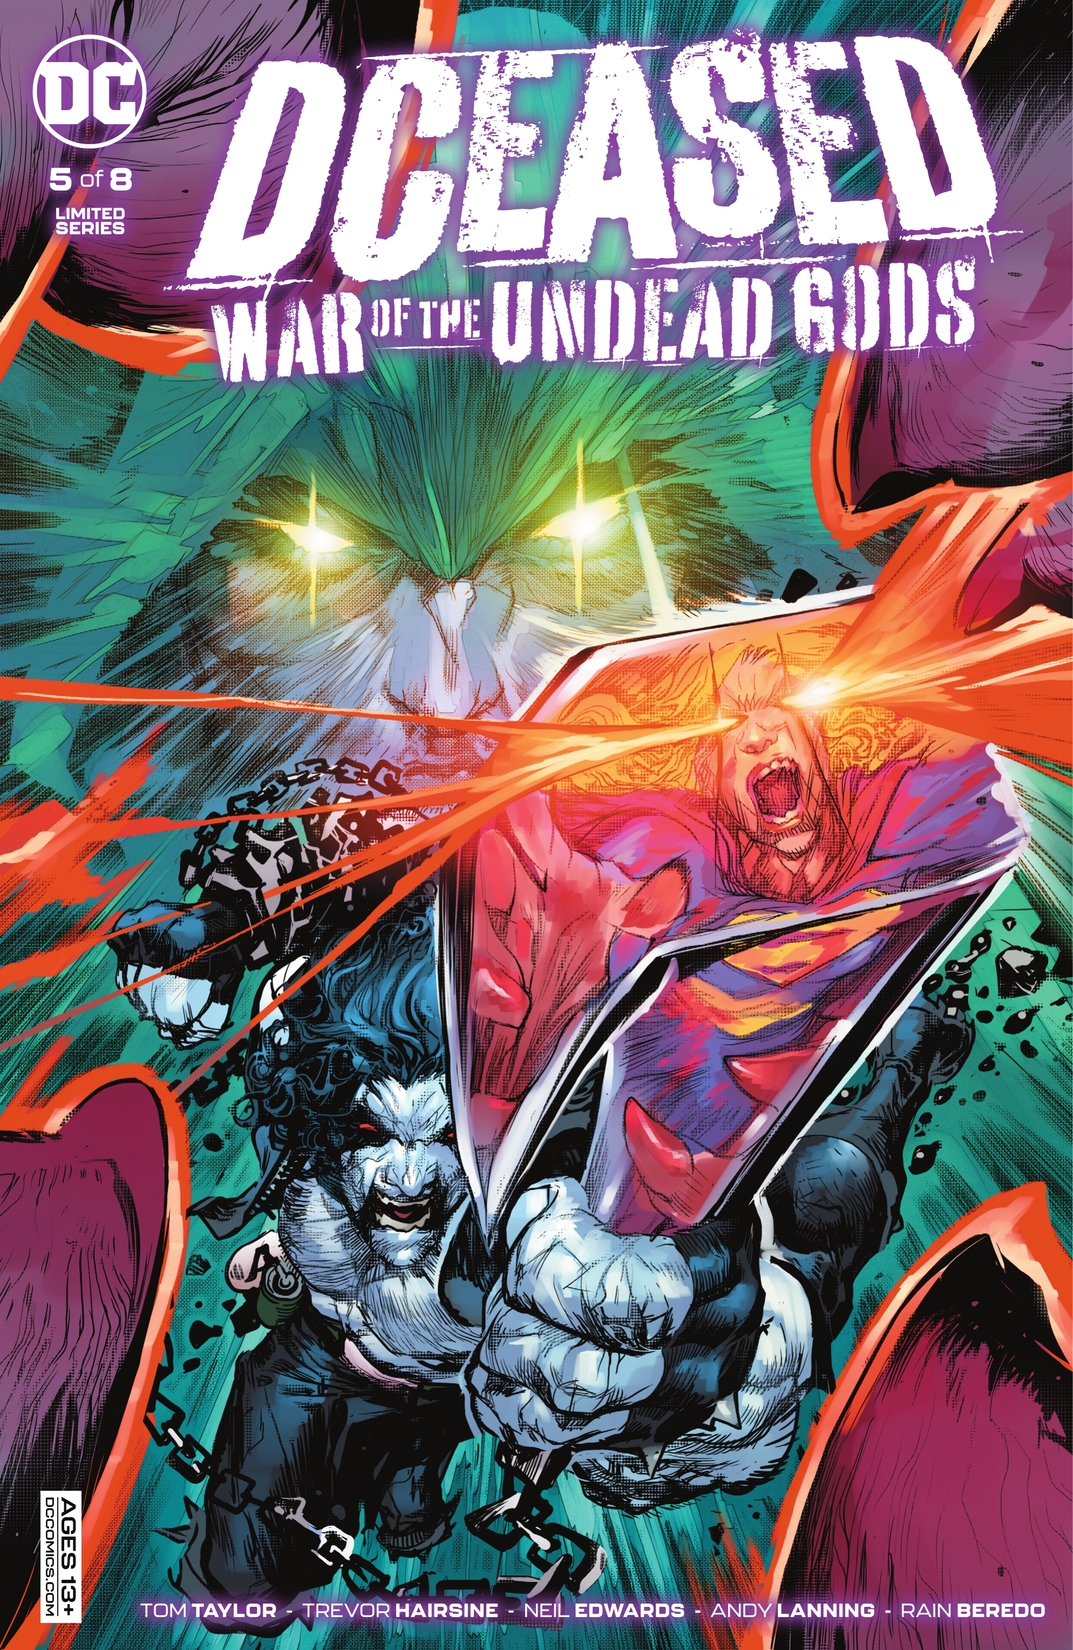 DCeased: War of the Undead Gods #5 preview images